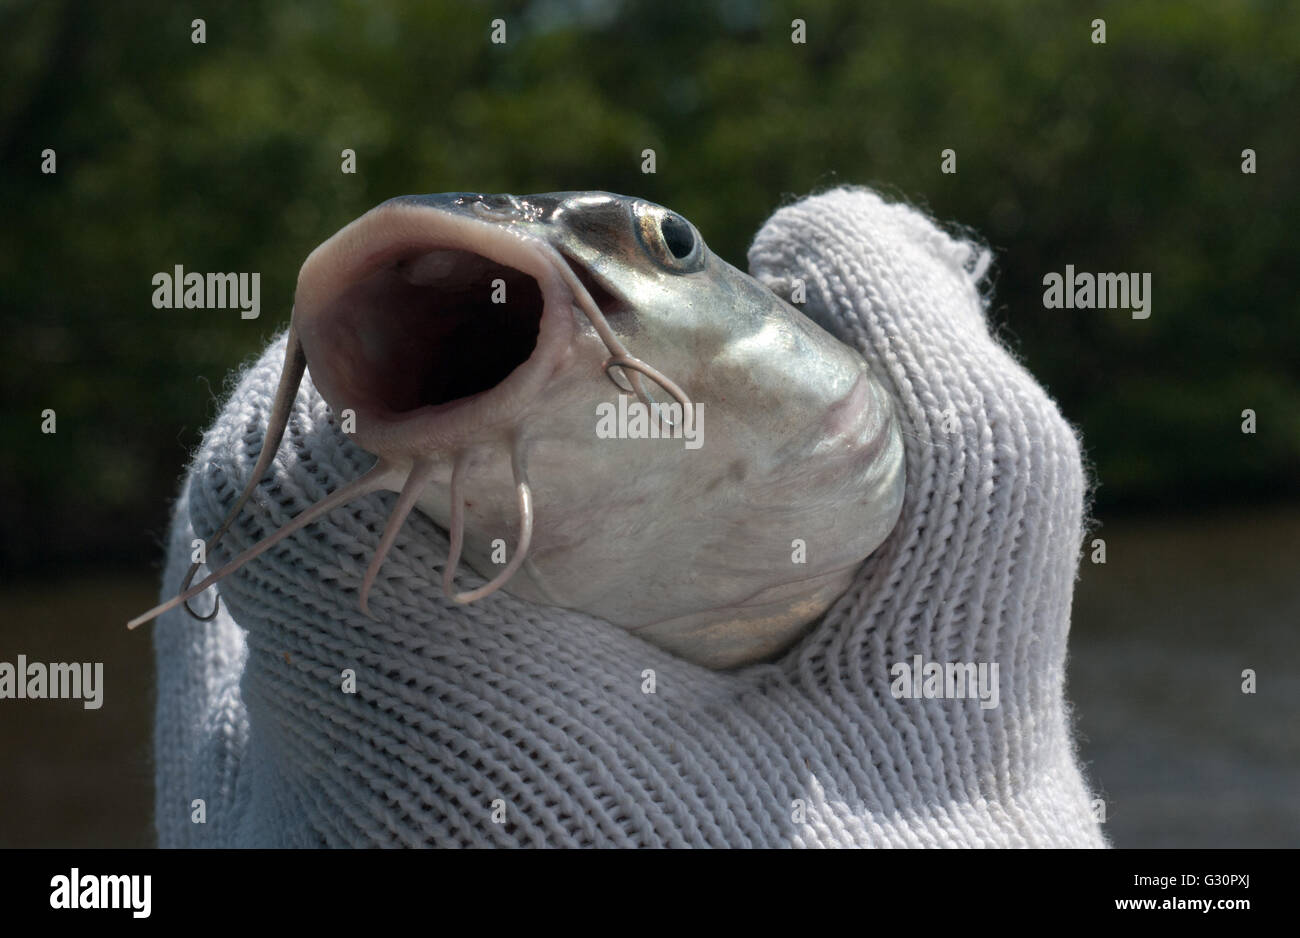 A catfish is held in a hand wearing a protective glove. Stock Photo